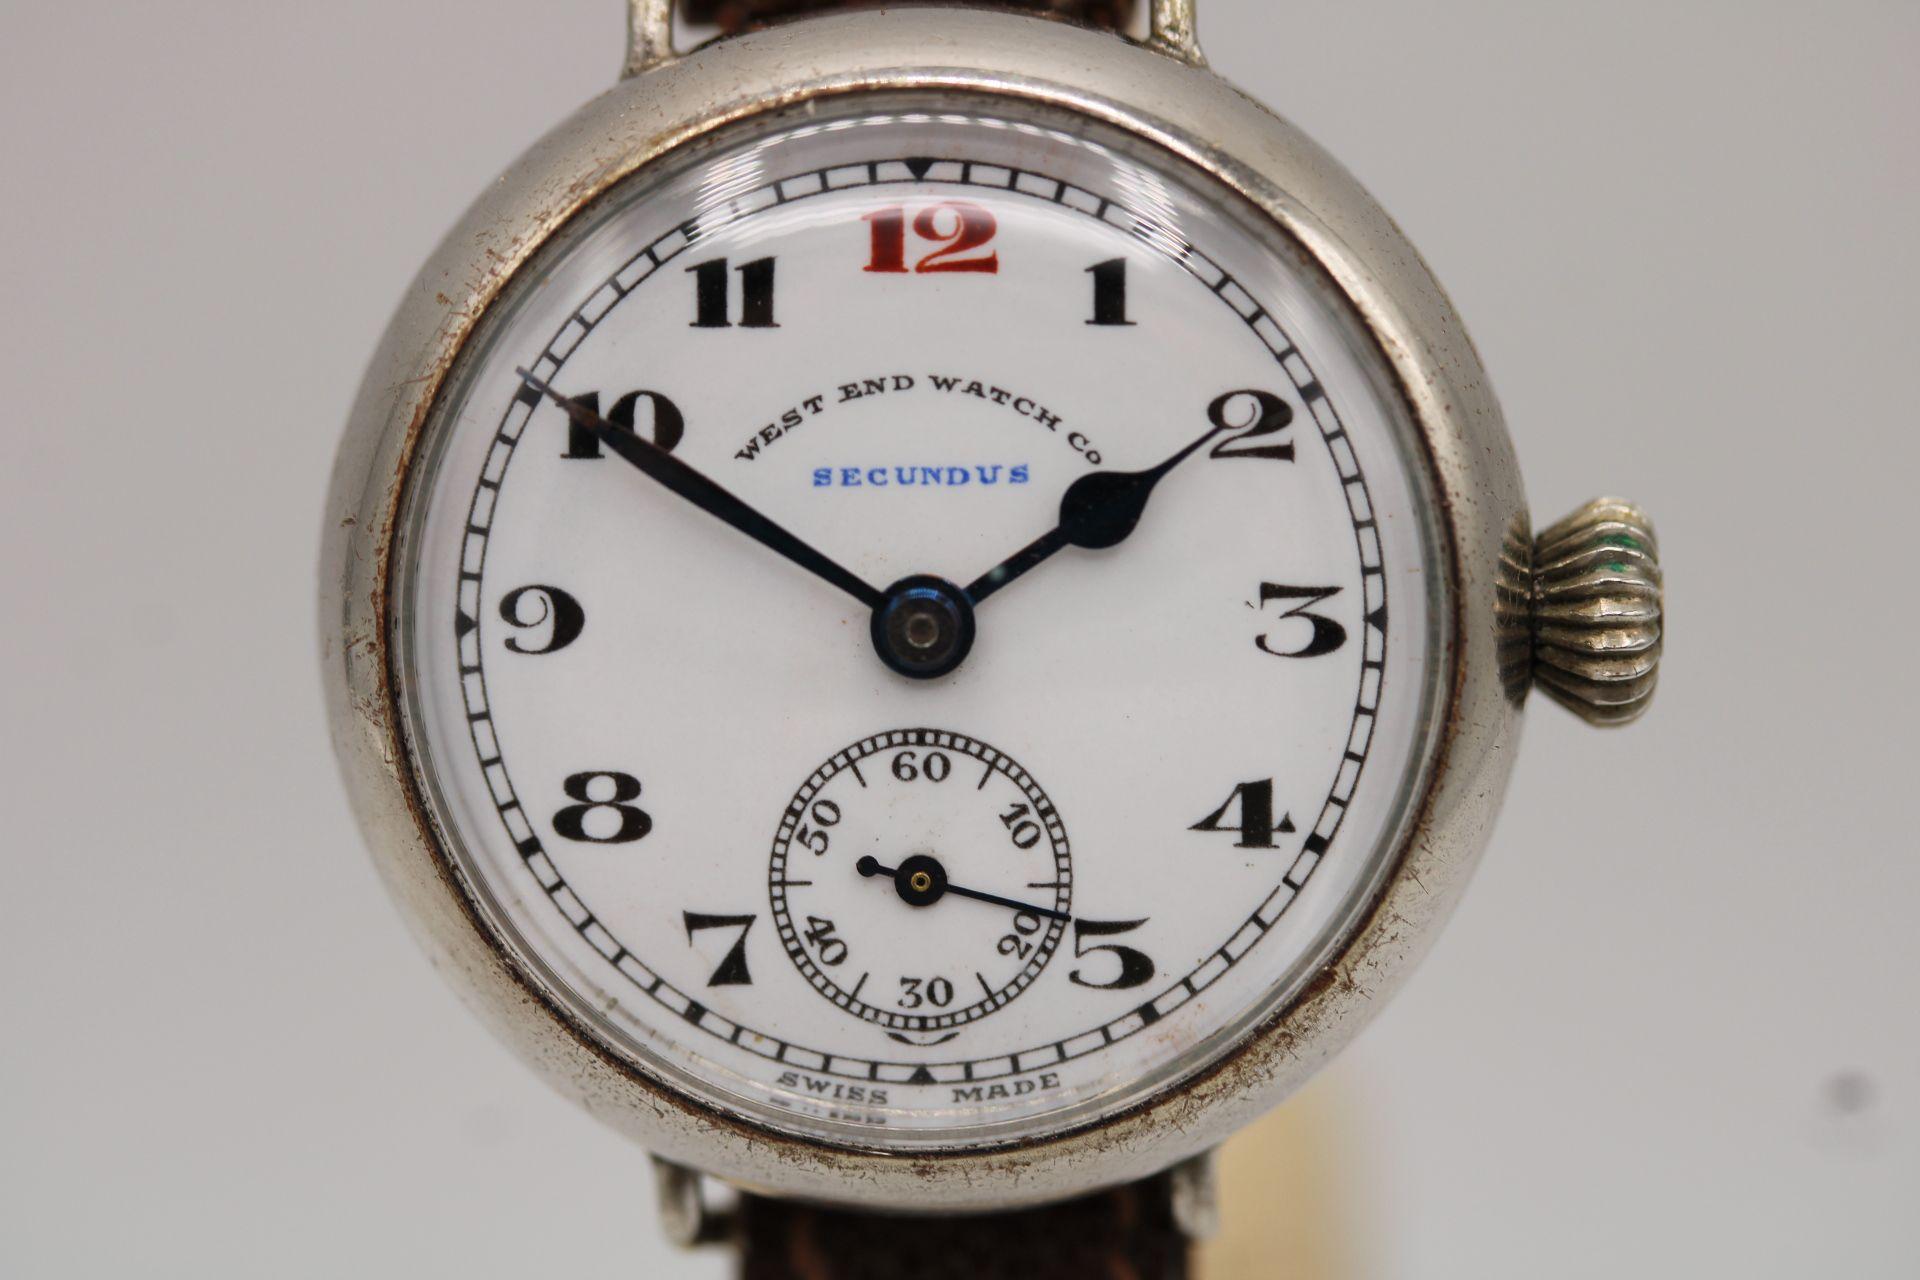 Watch: West End Watch Company - Secundus
Stock Number: CHW5424
Price: £495.00

This West End Watch Company Secundus model watch was sold and issued to the Indian Army mainly serving in 1922 across Iran, Egypt, Mesopotamia and Palestine.

Generally,